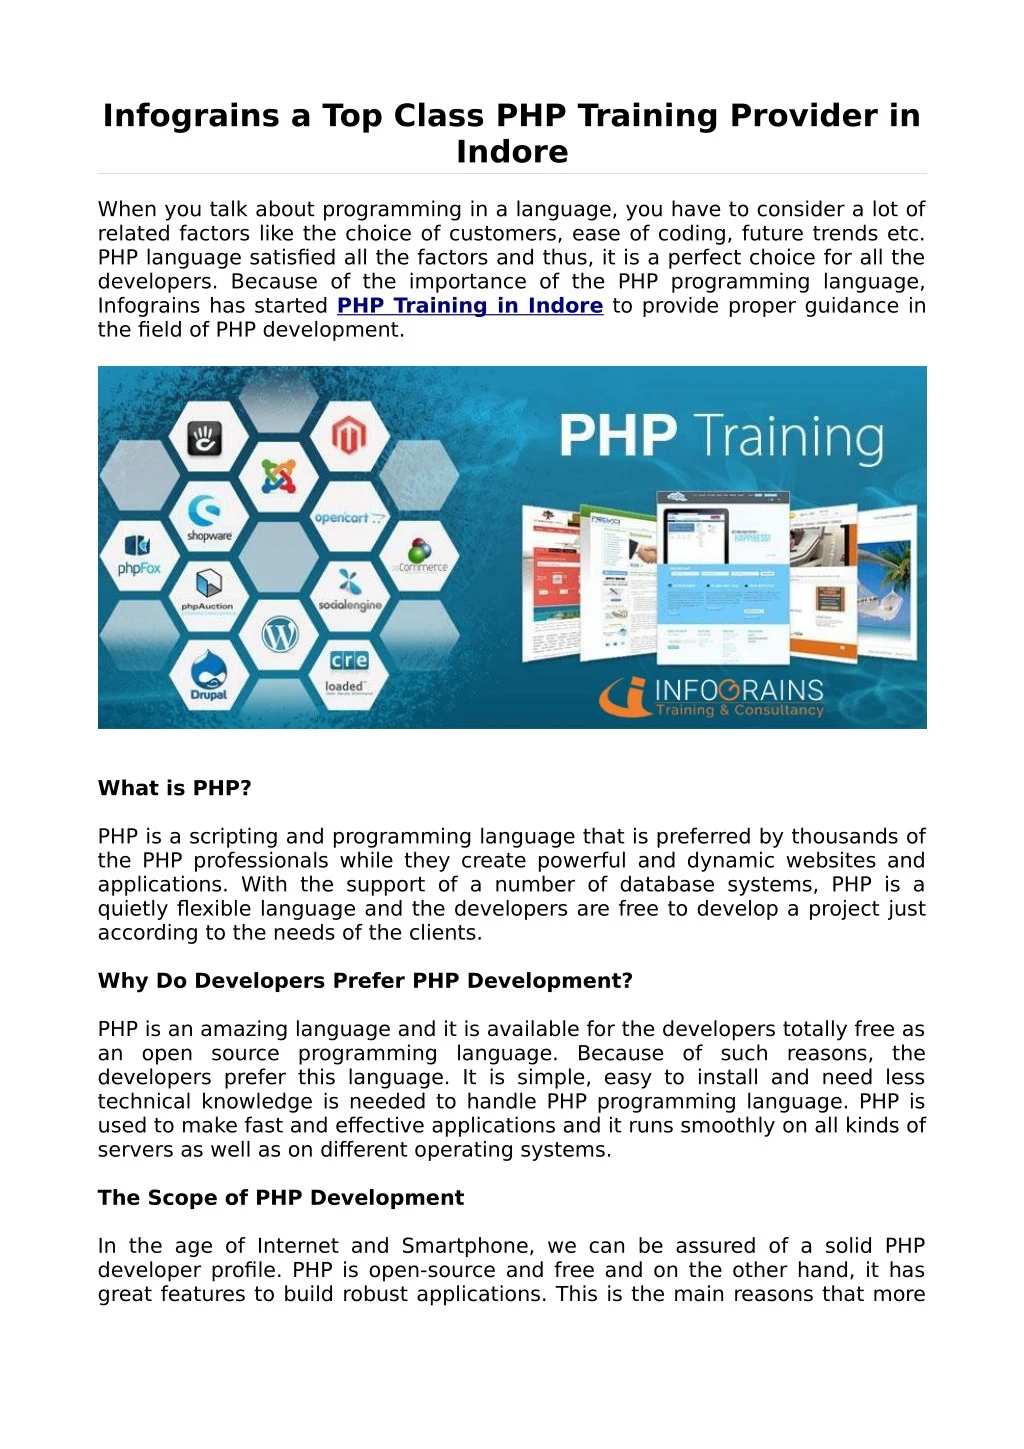 infograins a top class php training provider